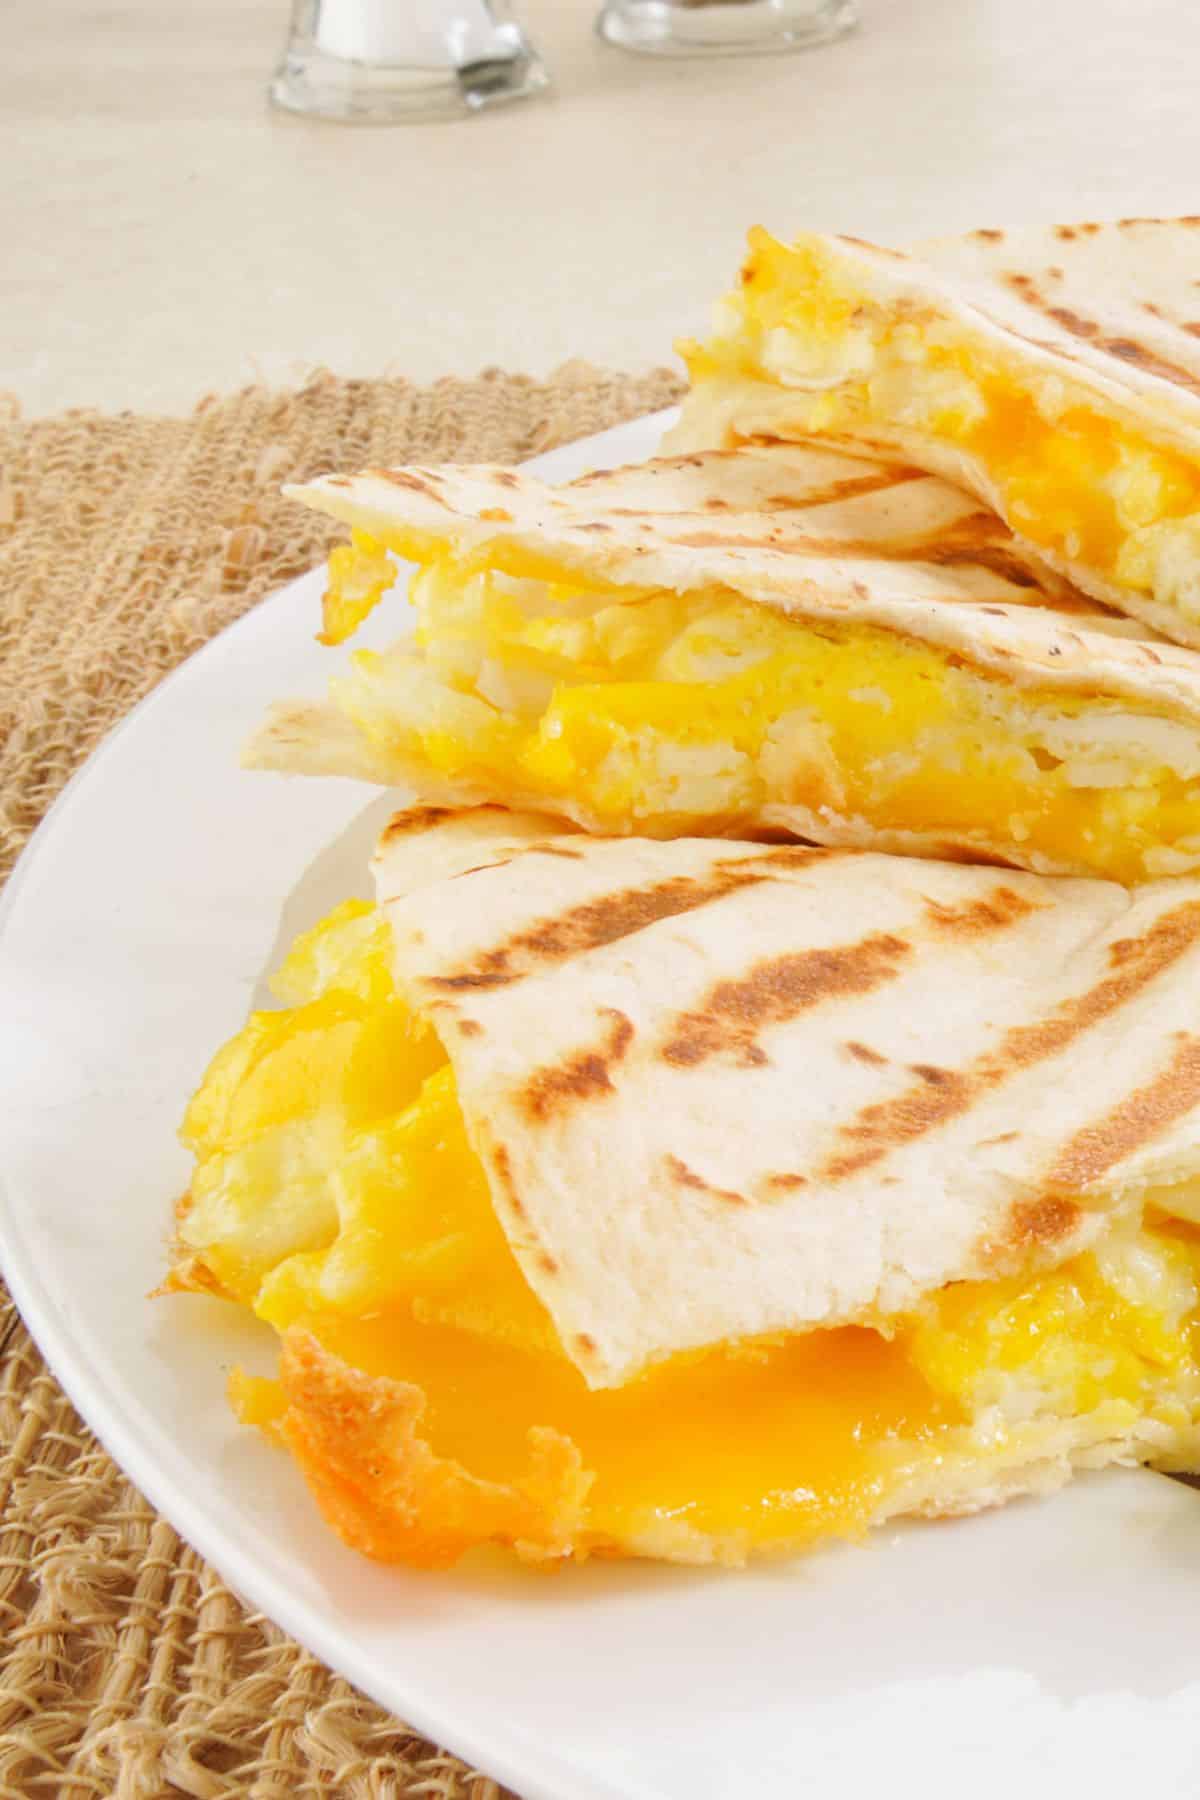 Egg and cheese breakfast quesadilla slices on a plate.